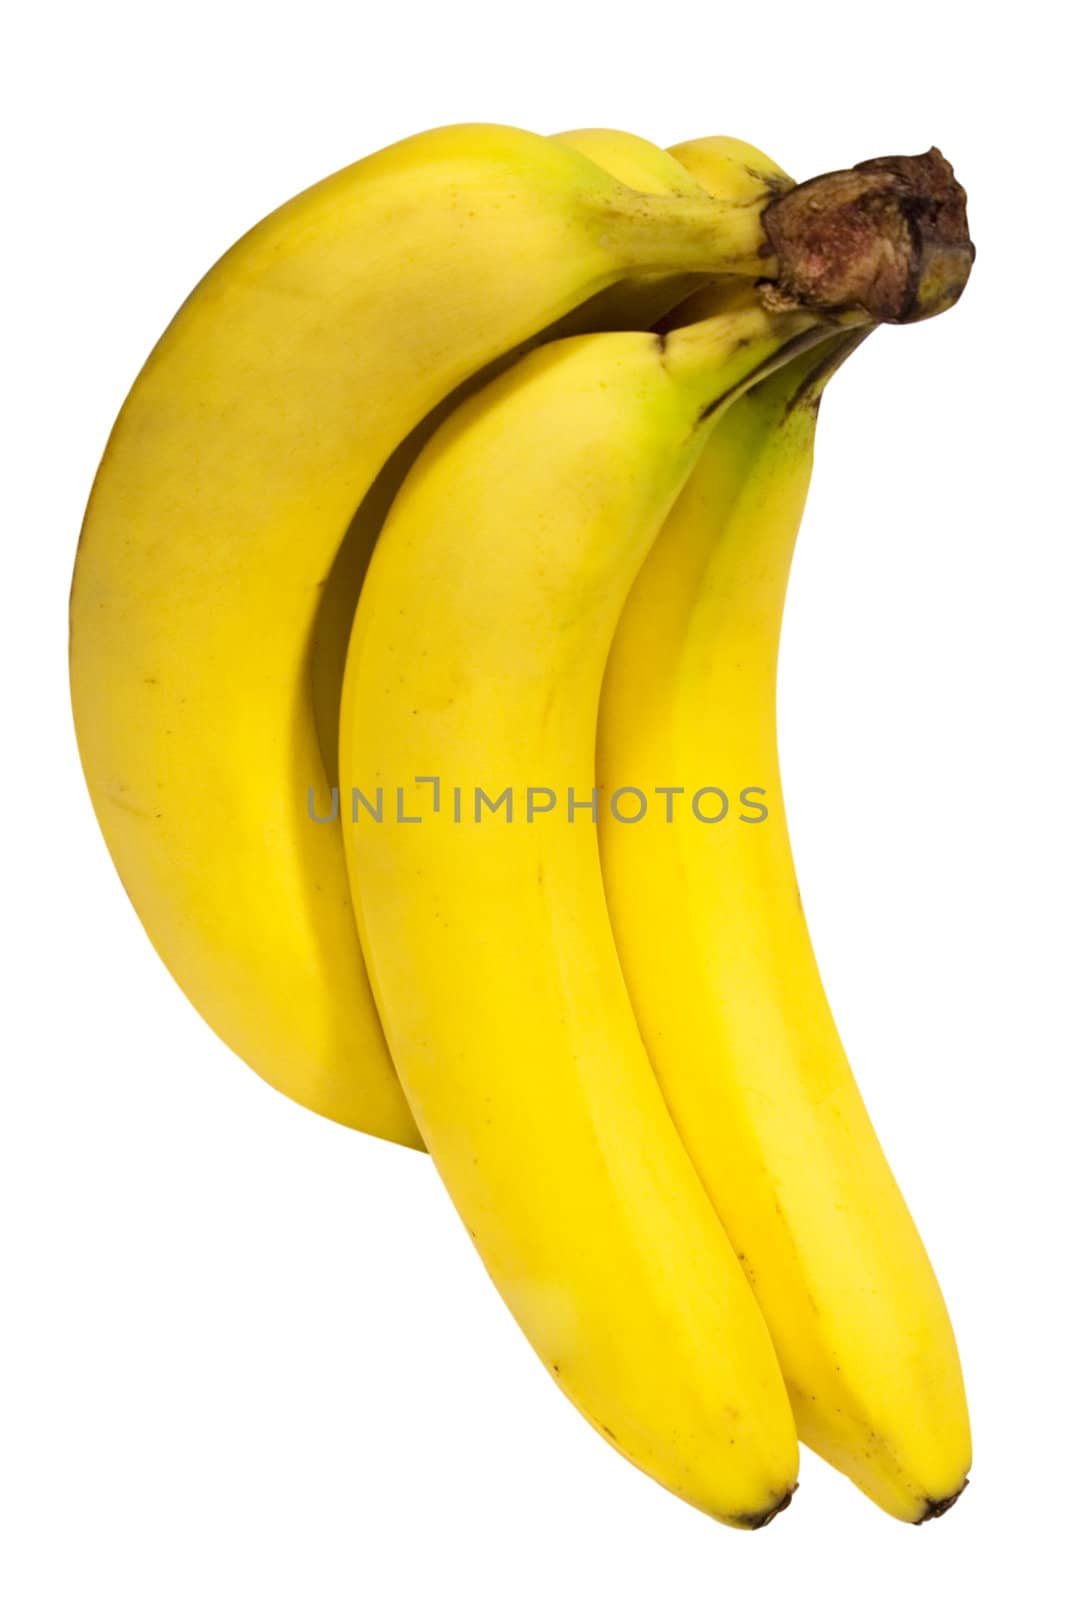 Bunch of bananas on a white background. File contains clipping path.